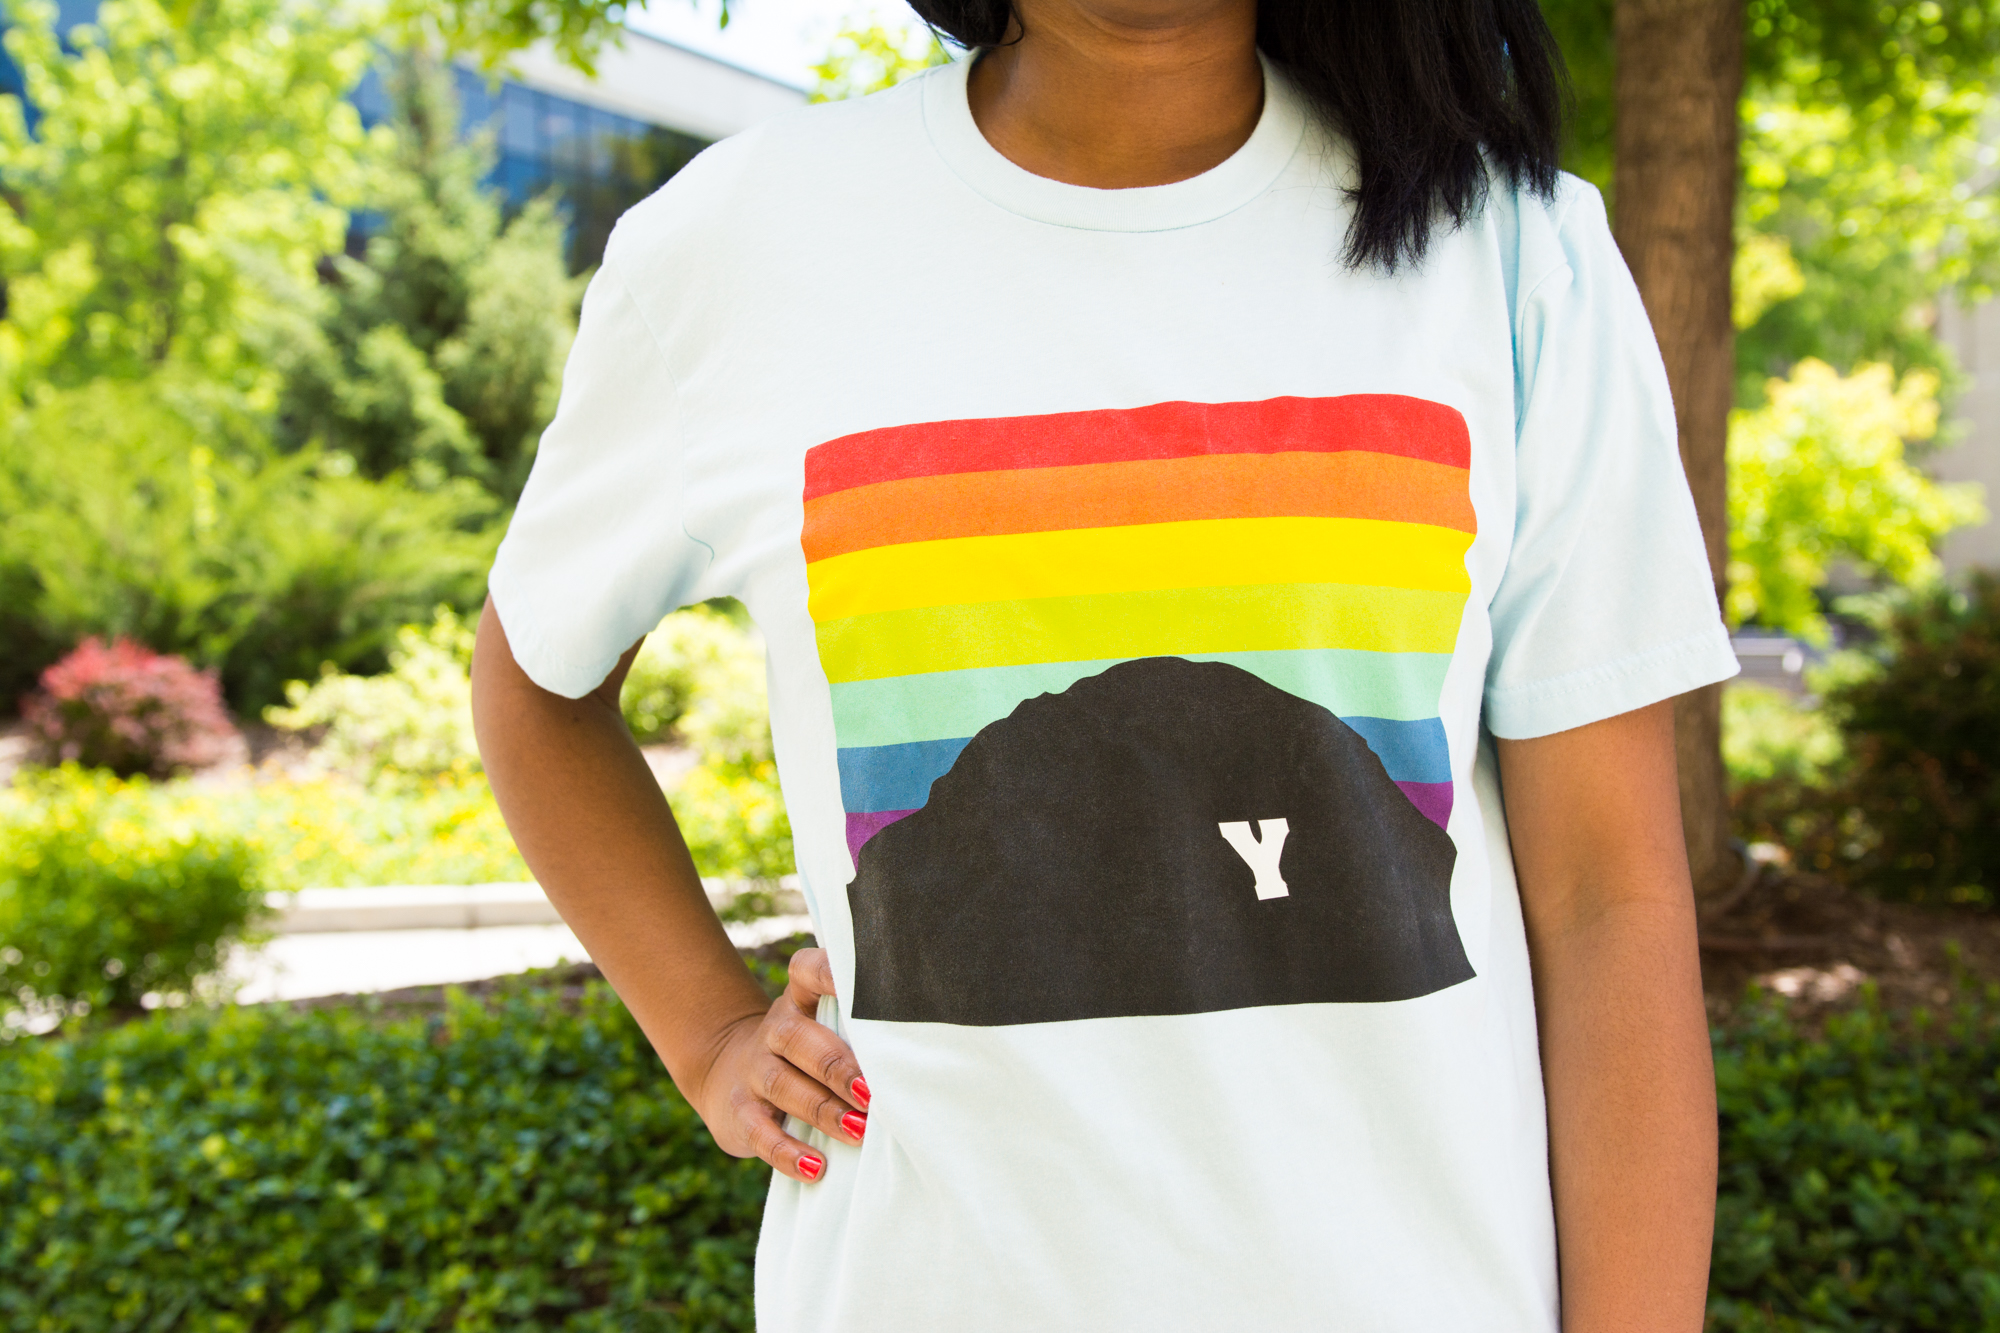 The Provo USGA T-shirt and logo. USGA is an open forum for BYU students, faculty, and guests to respectfully discuss LGBT issues.